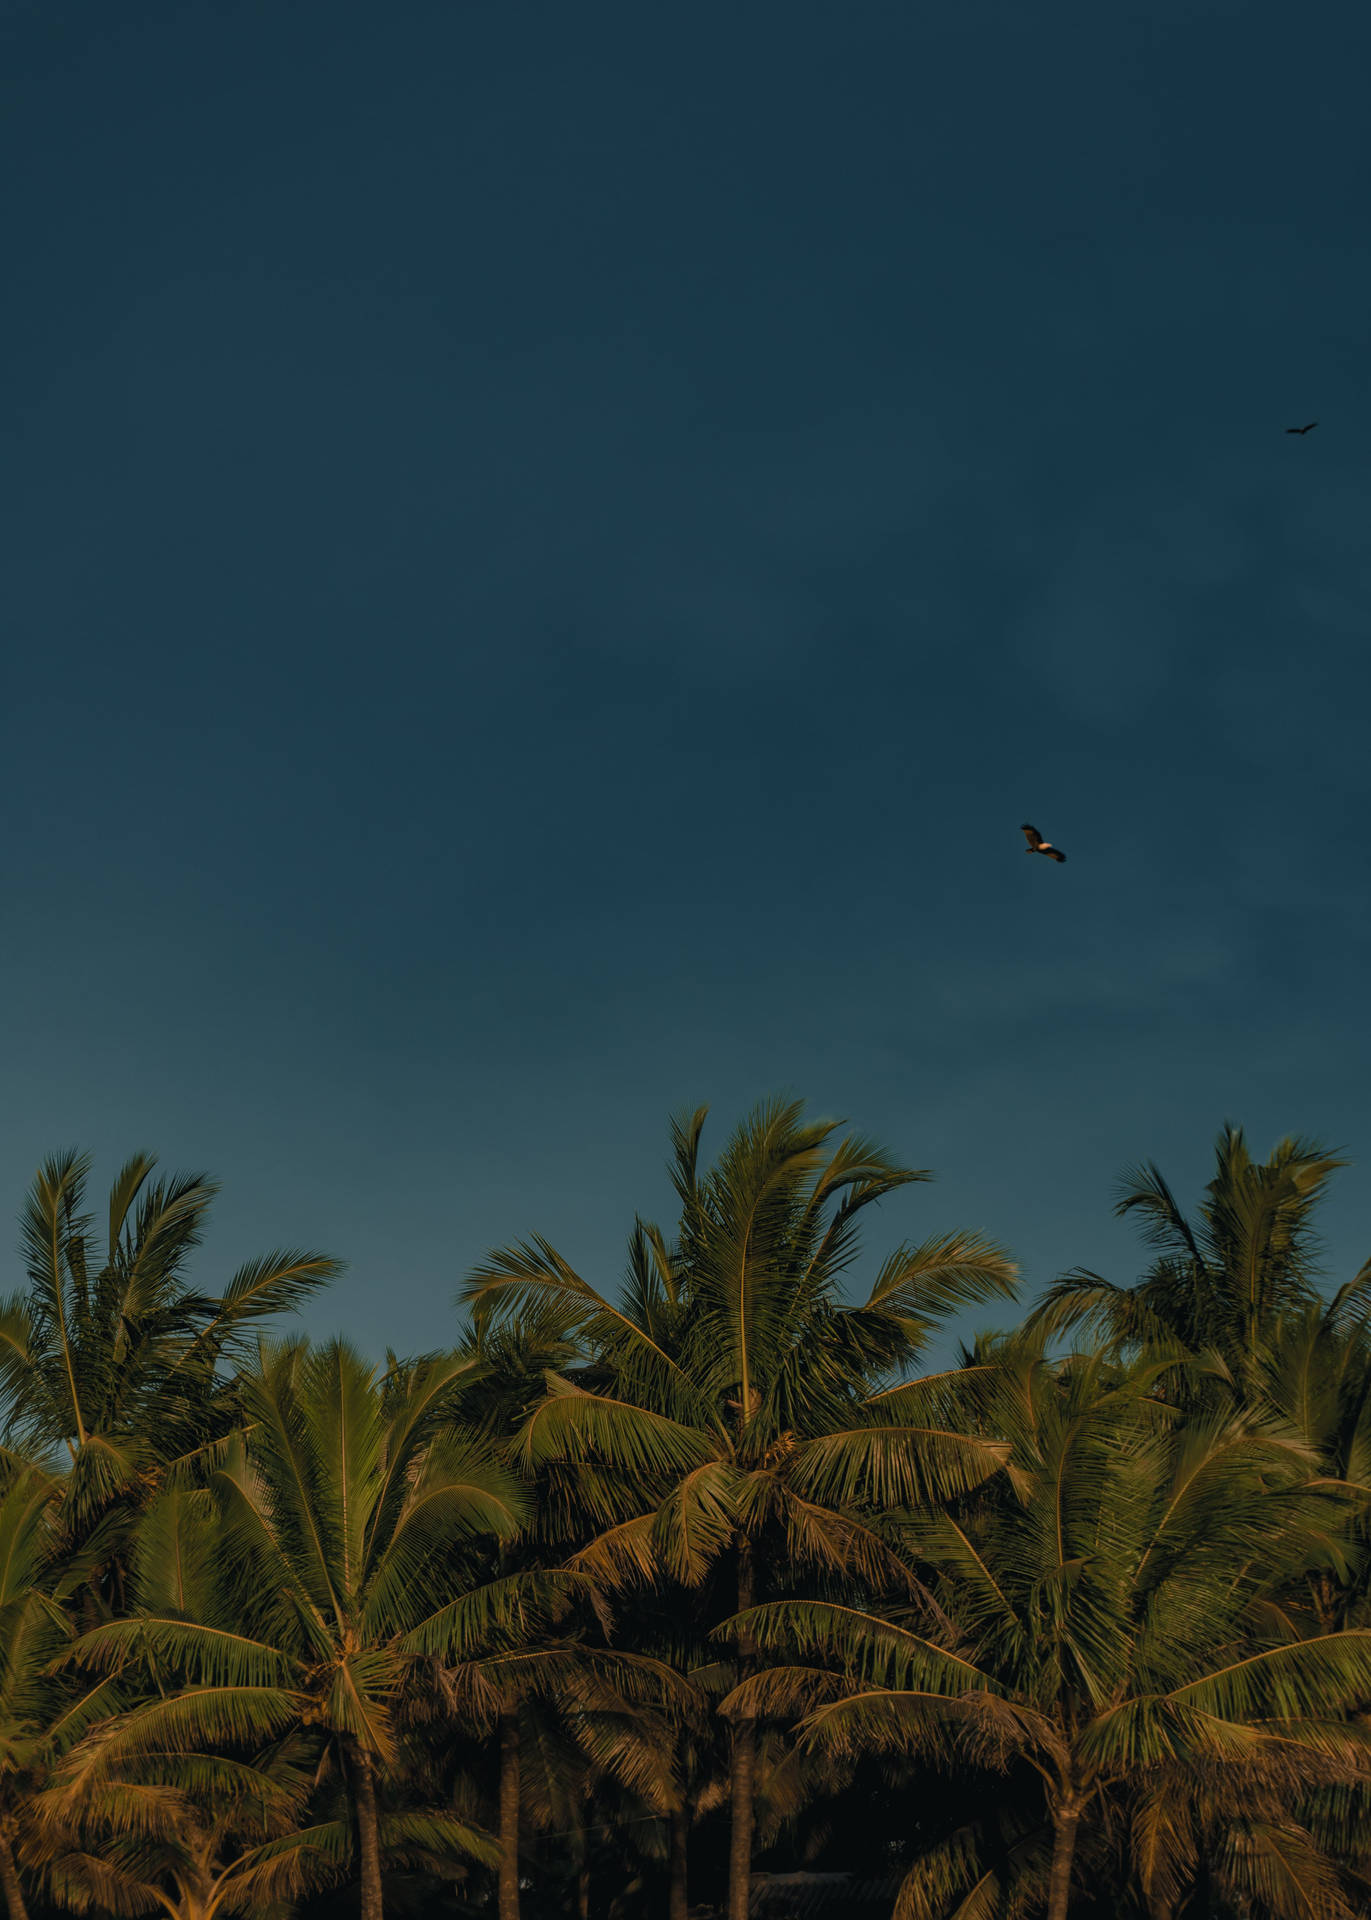 A View of the Sky Dimly Lit by Coconut Trees Wallpaper